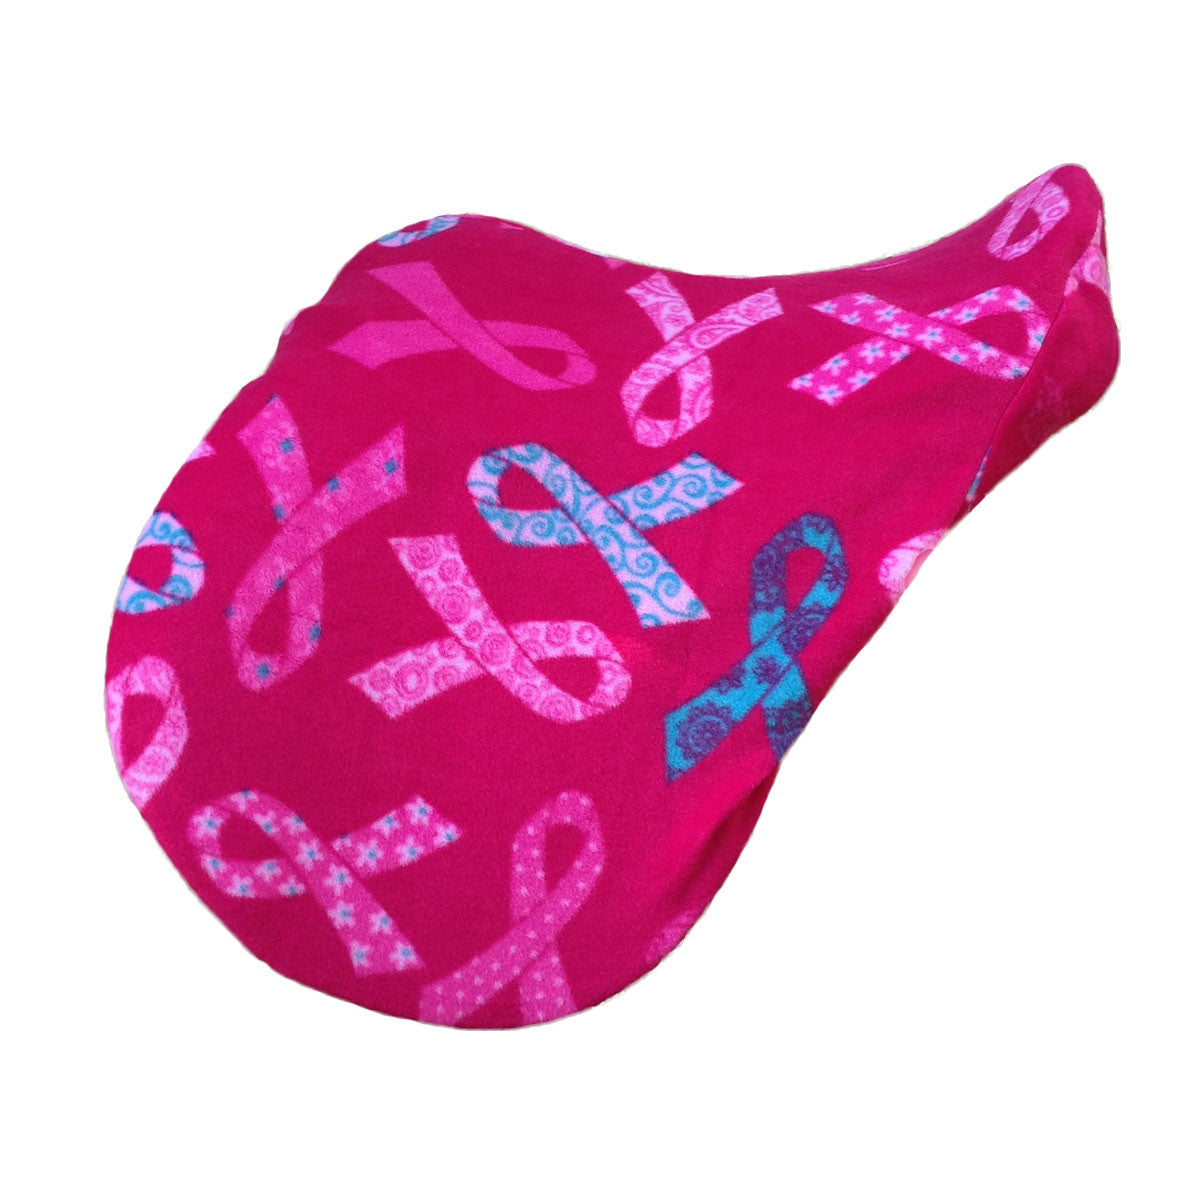 Breast cancer support saddle cover